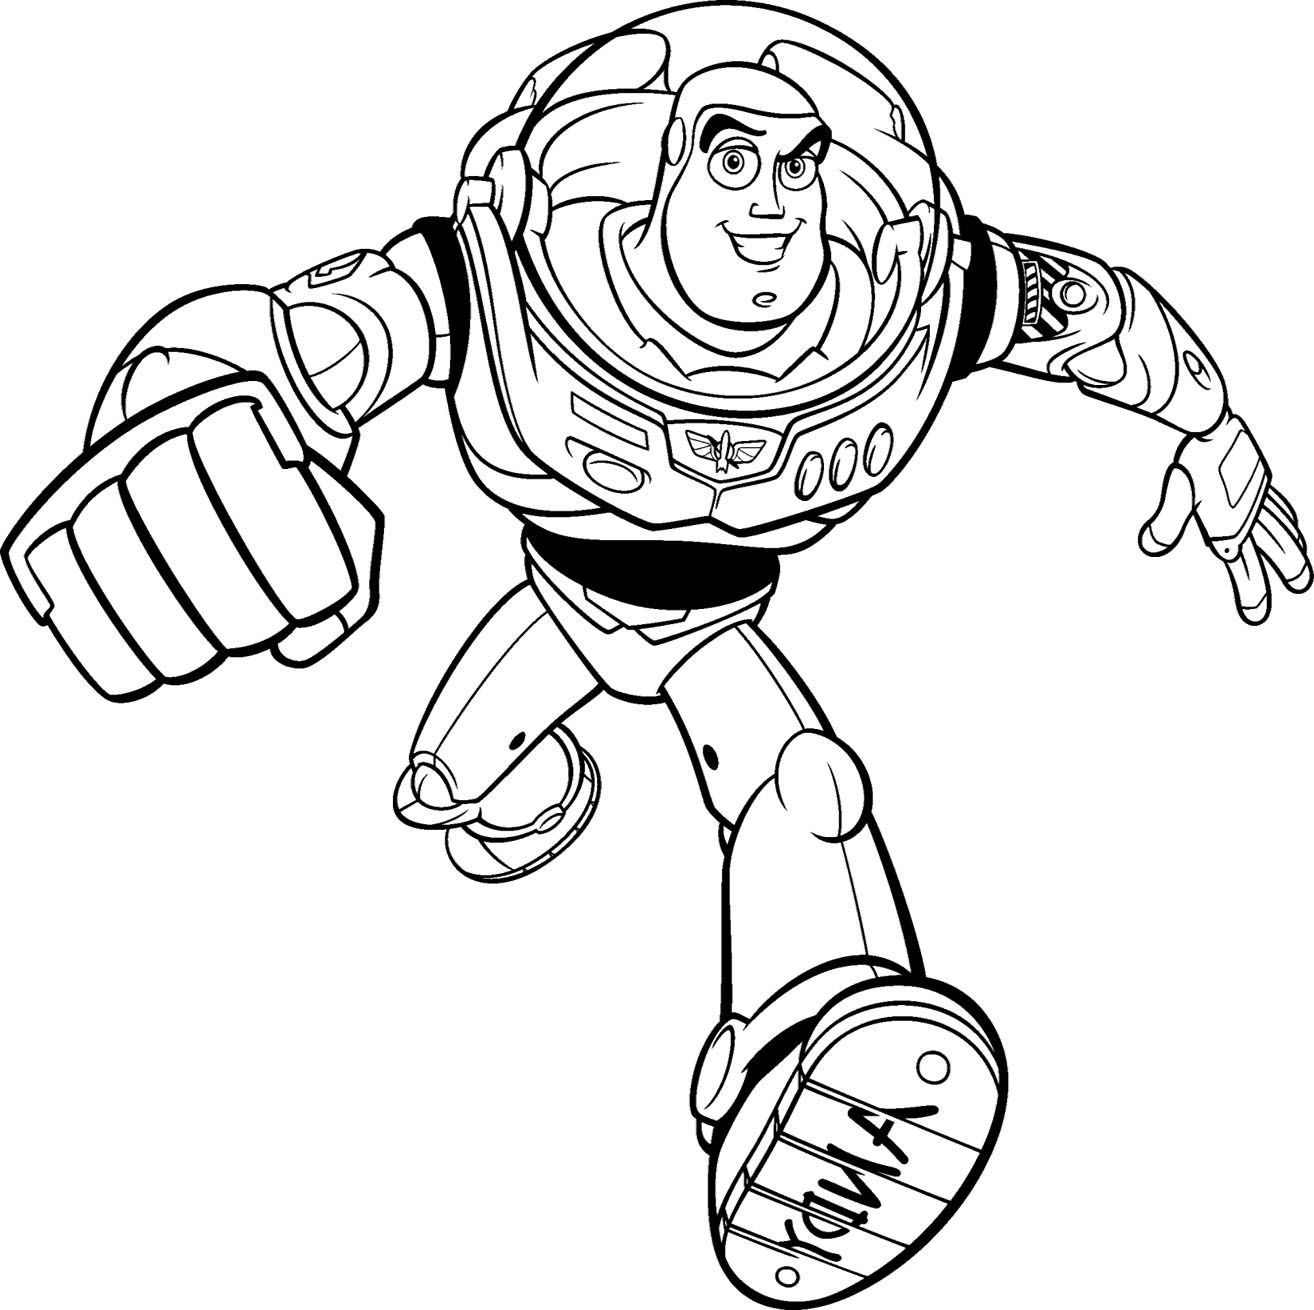 toy-story-alien-drawing-free-download-on-clipartmag